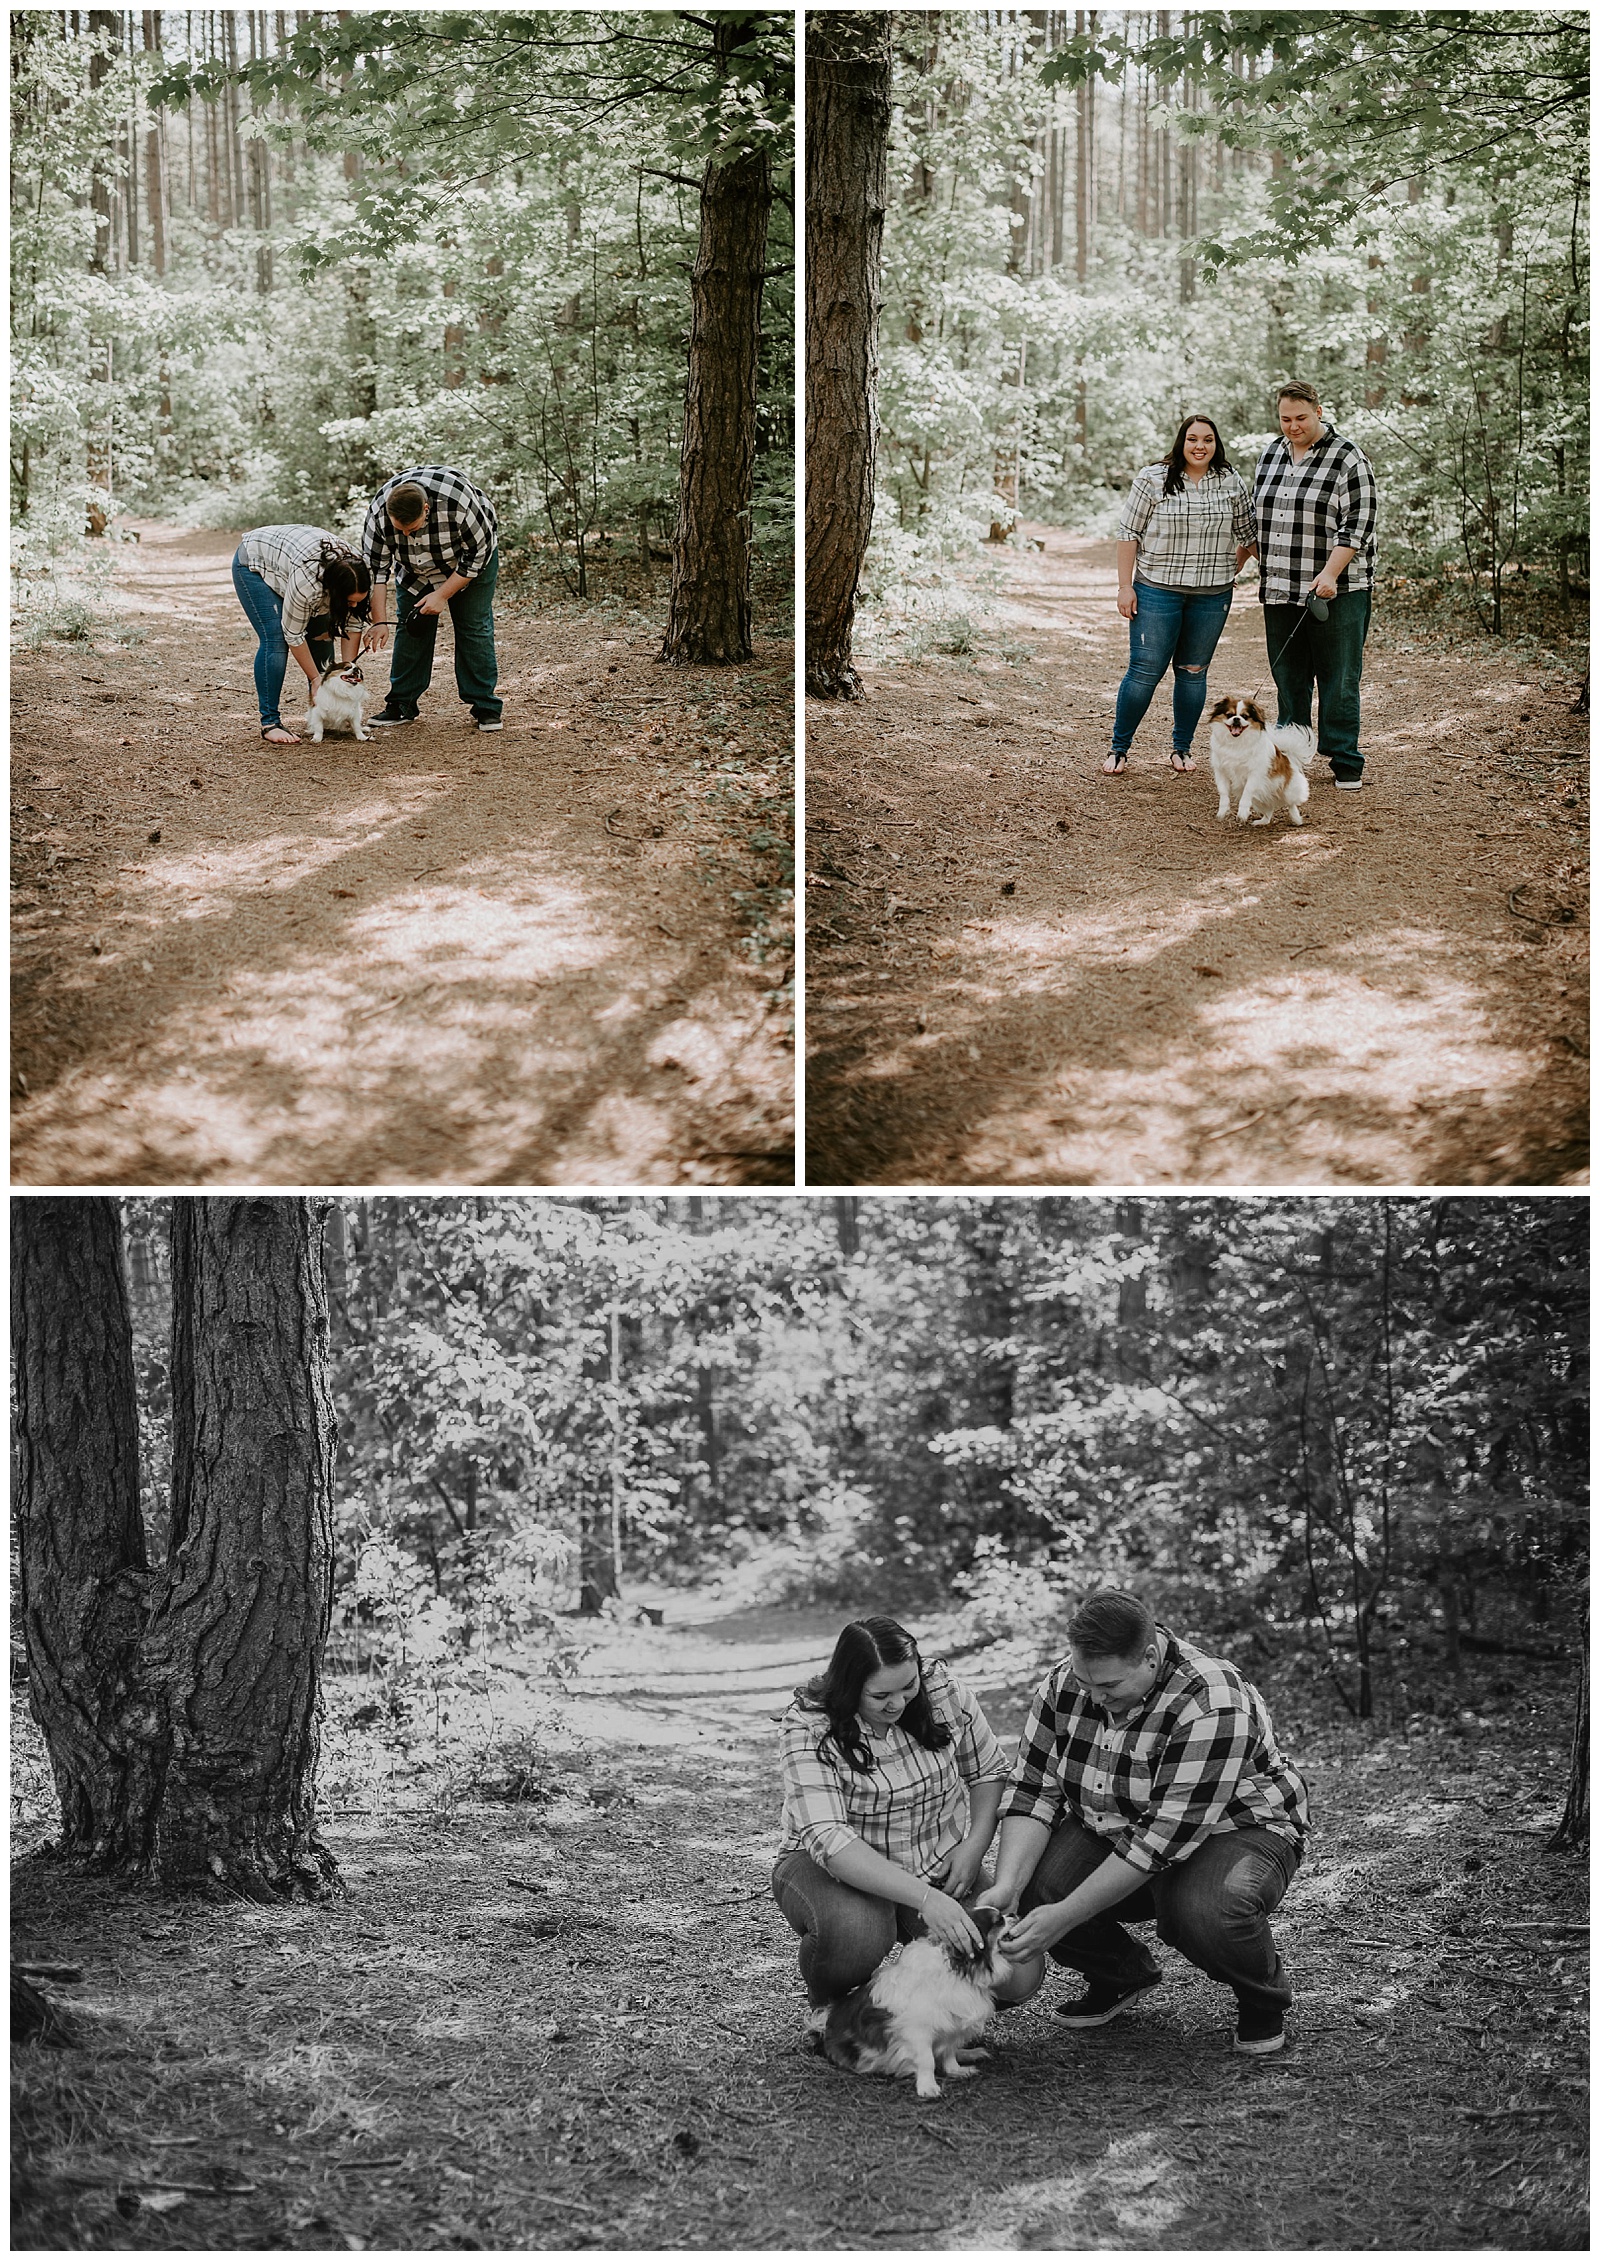 Grand Rapids Engagement Photographer Liv Lyszyk Photography at Provin Trails in Grand Rapids, Michigan